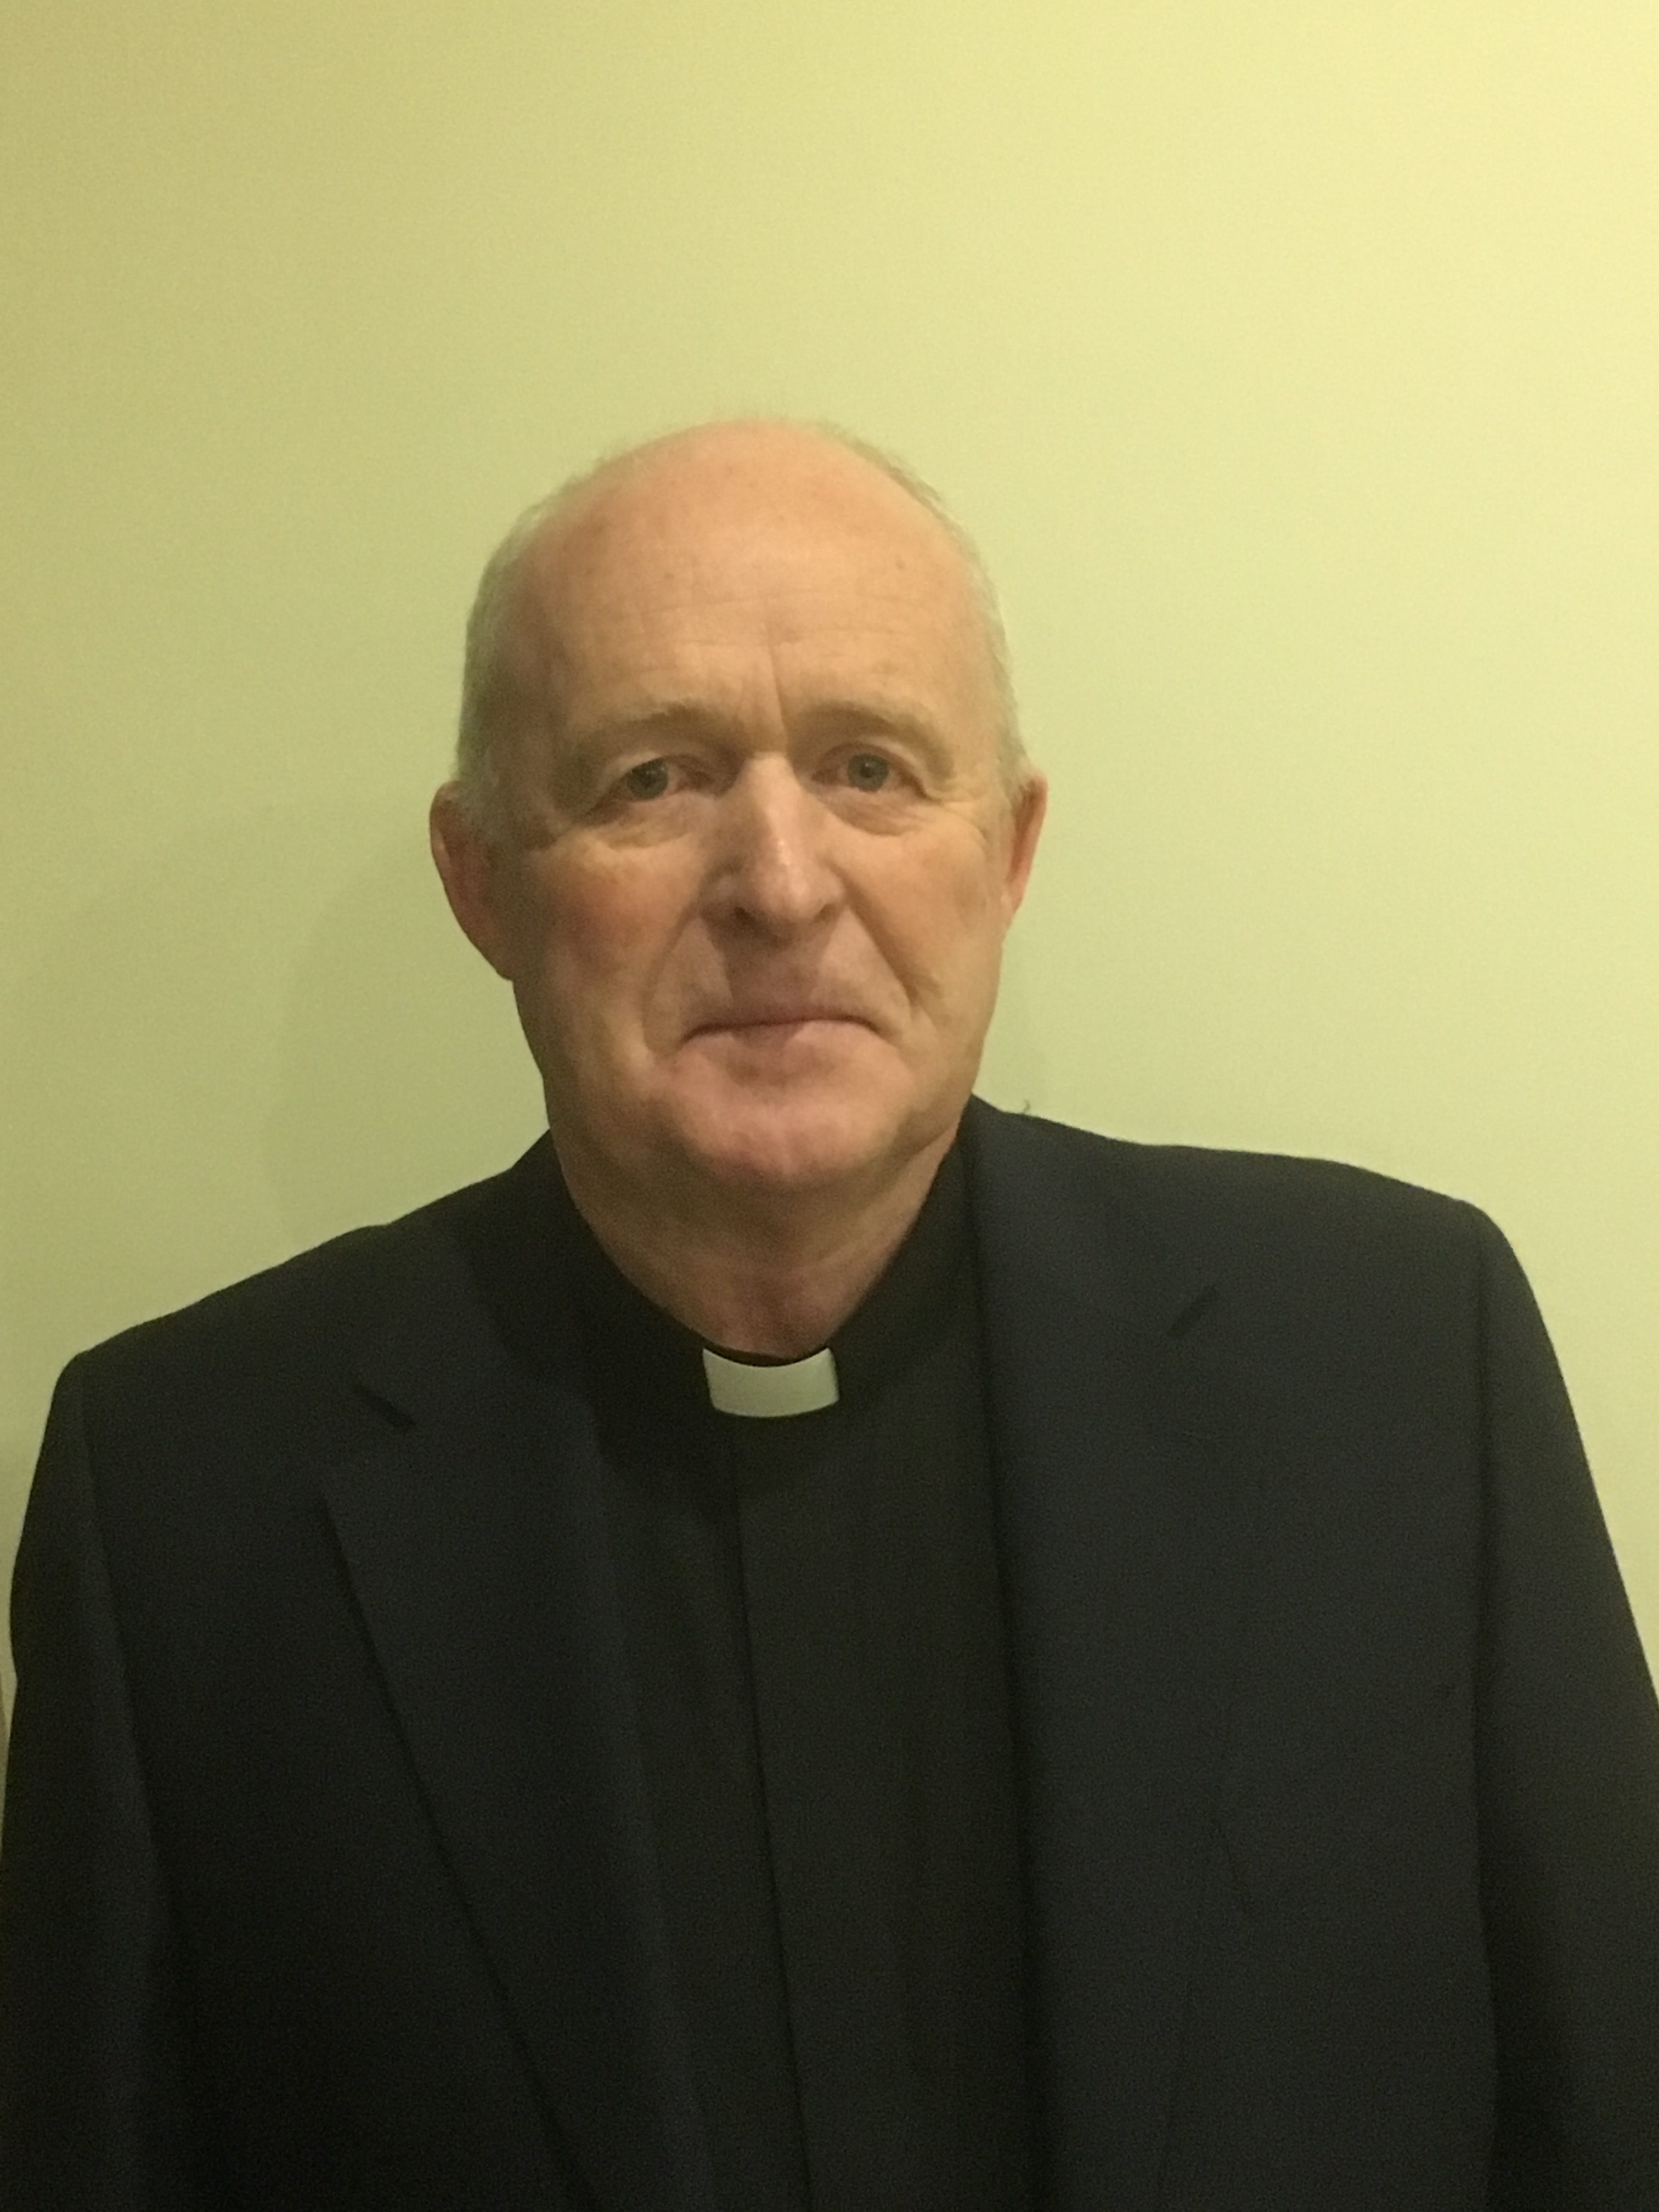 Former Magheracloone Player Mgr Larry Duffy Appointed Bishop of Clogher